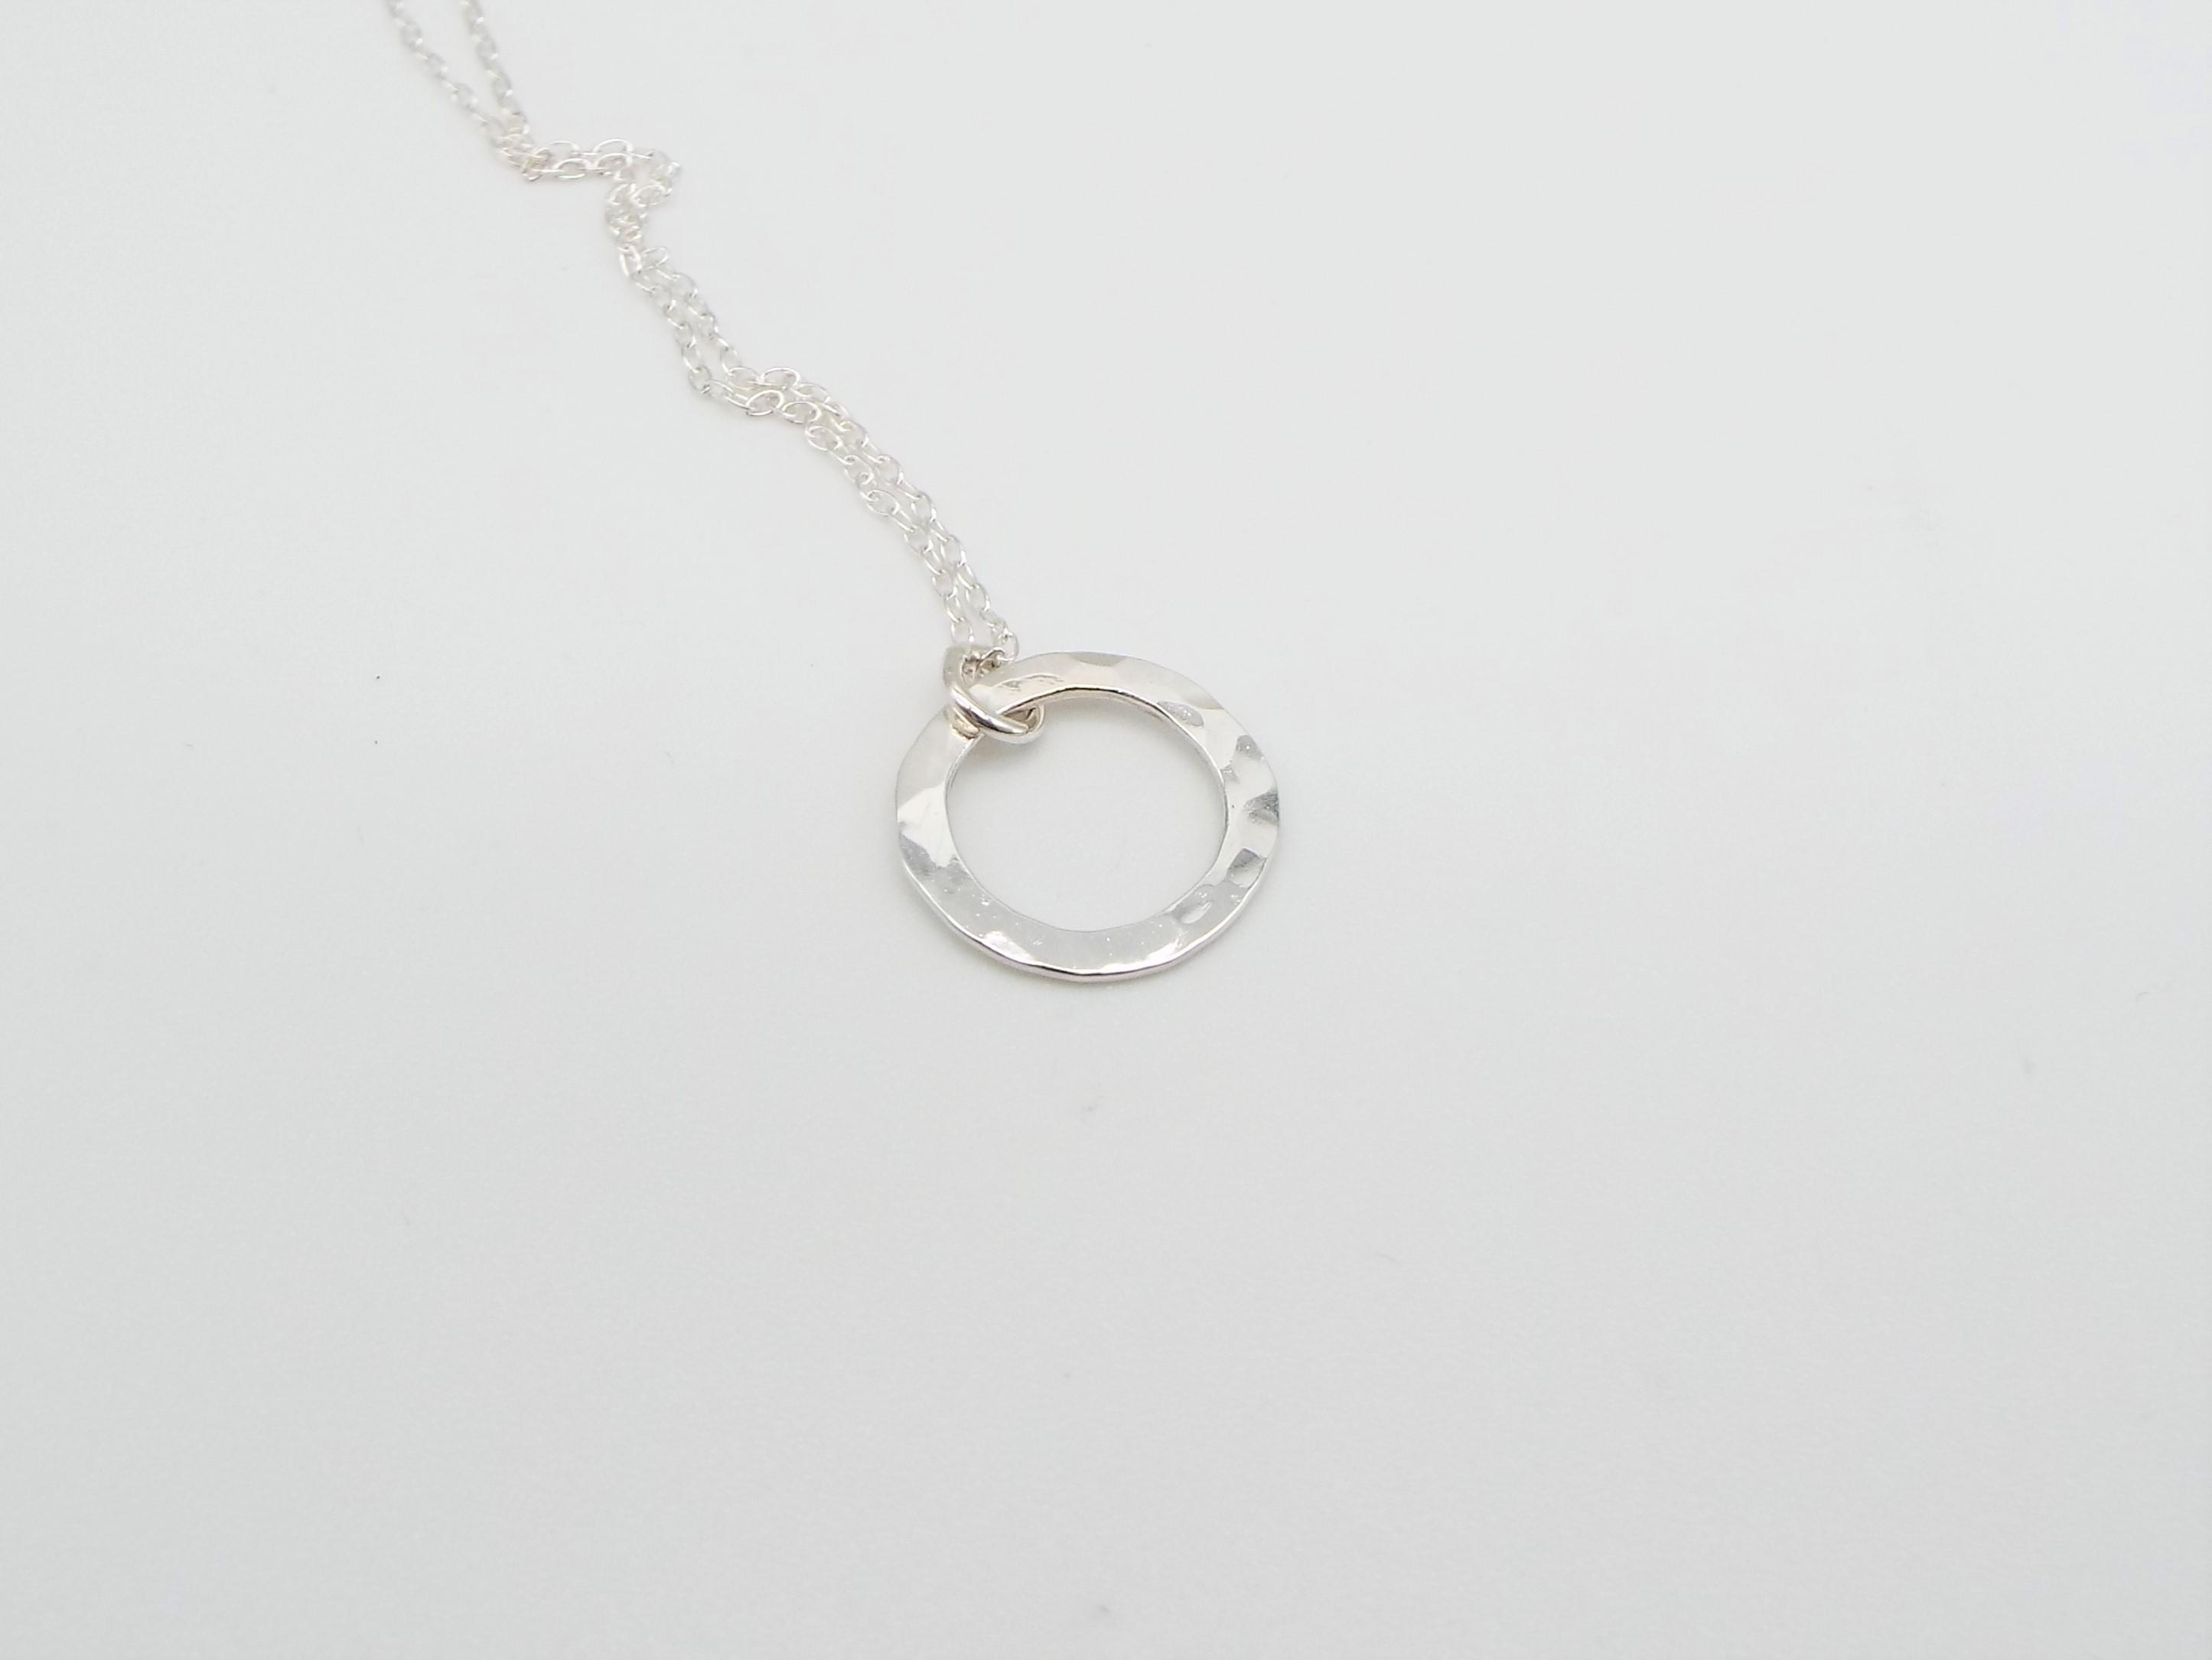 silver circle necklace with a hammered finish